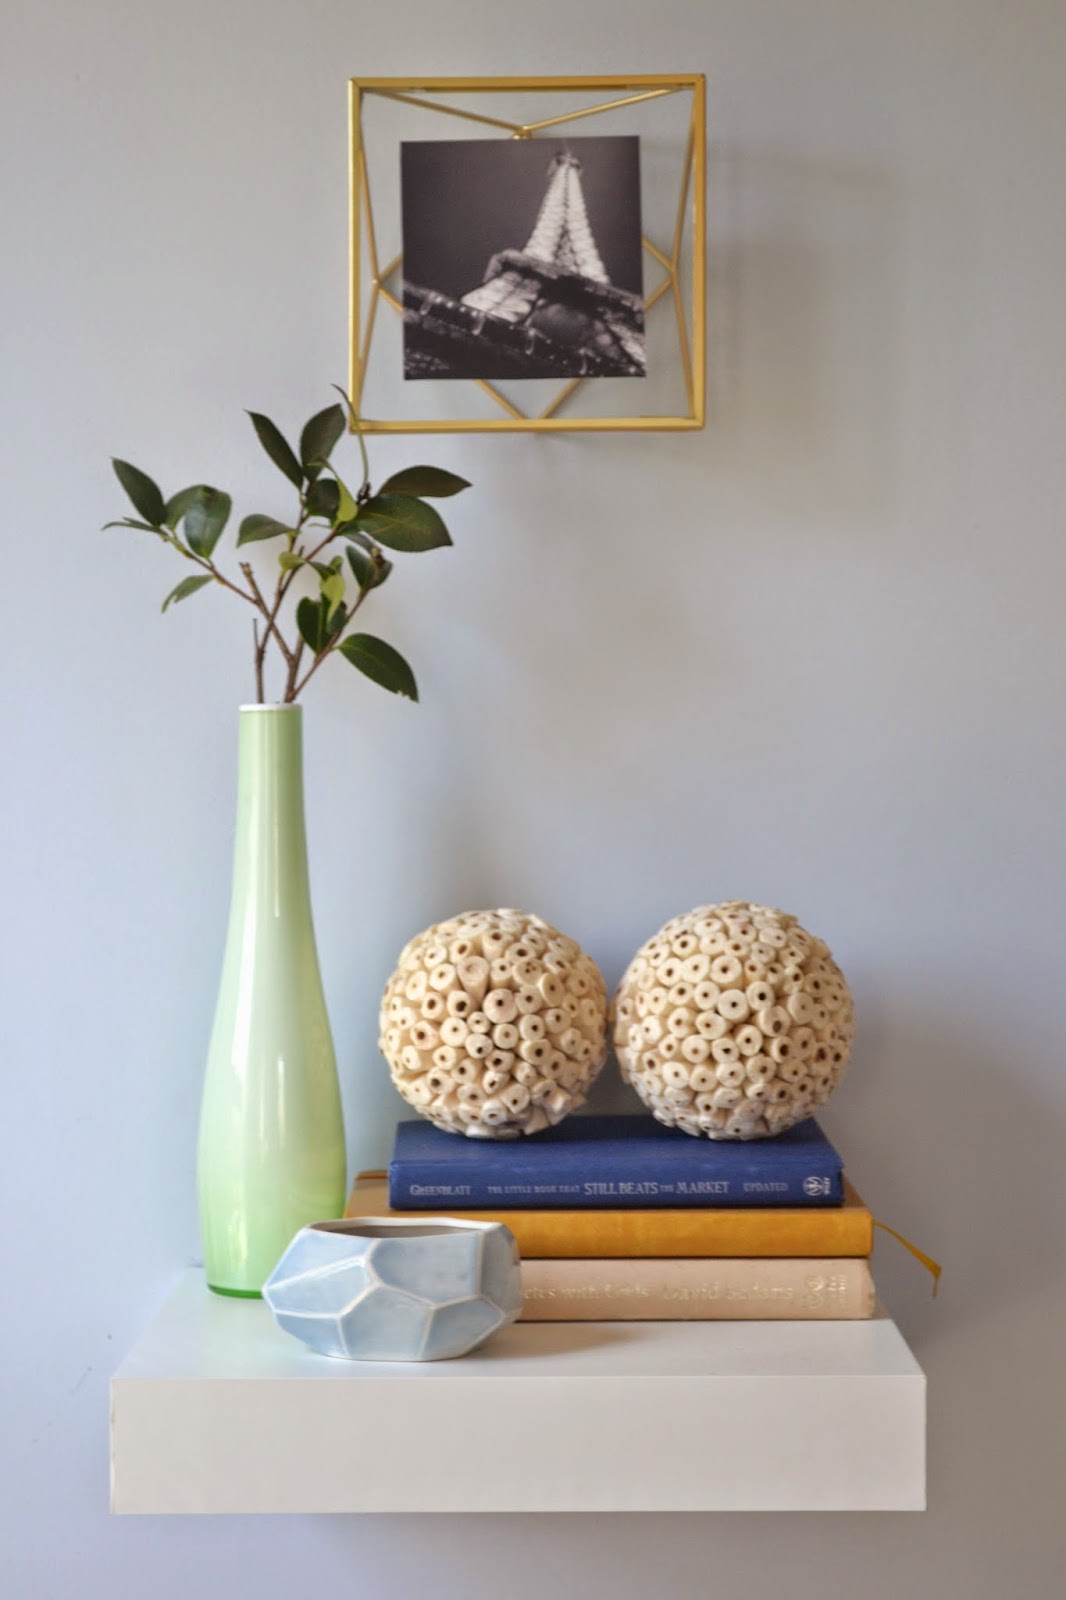 Decor "Quick Fix": 3 words to use when styling